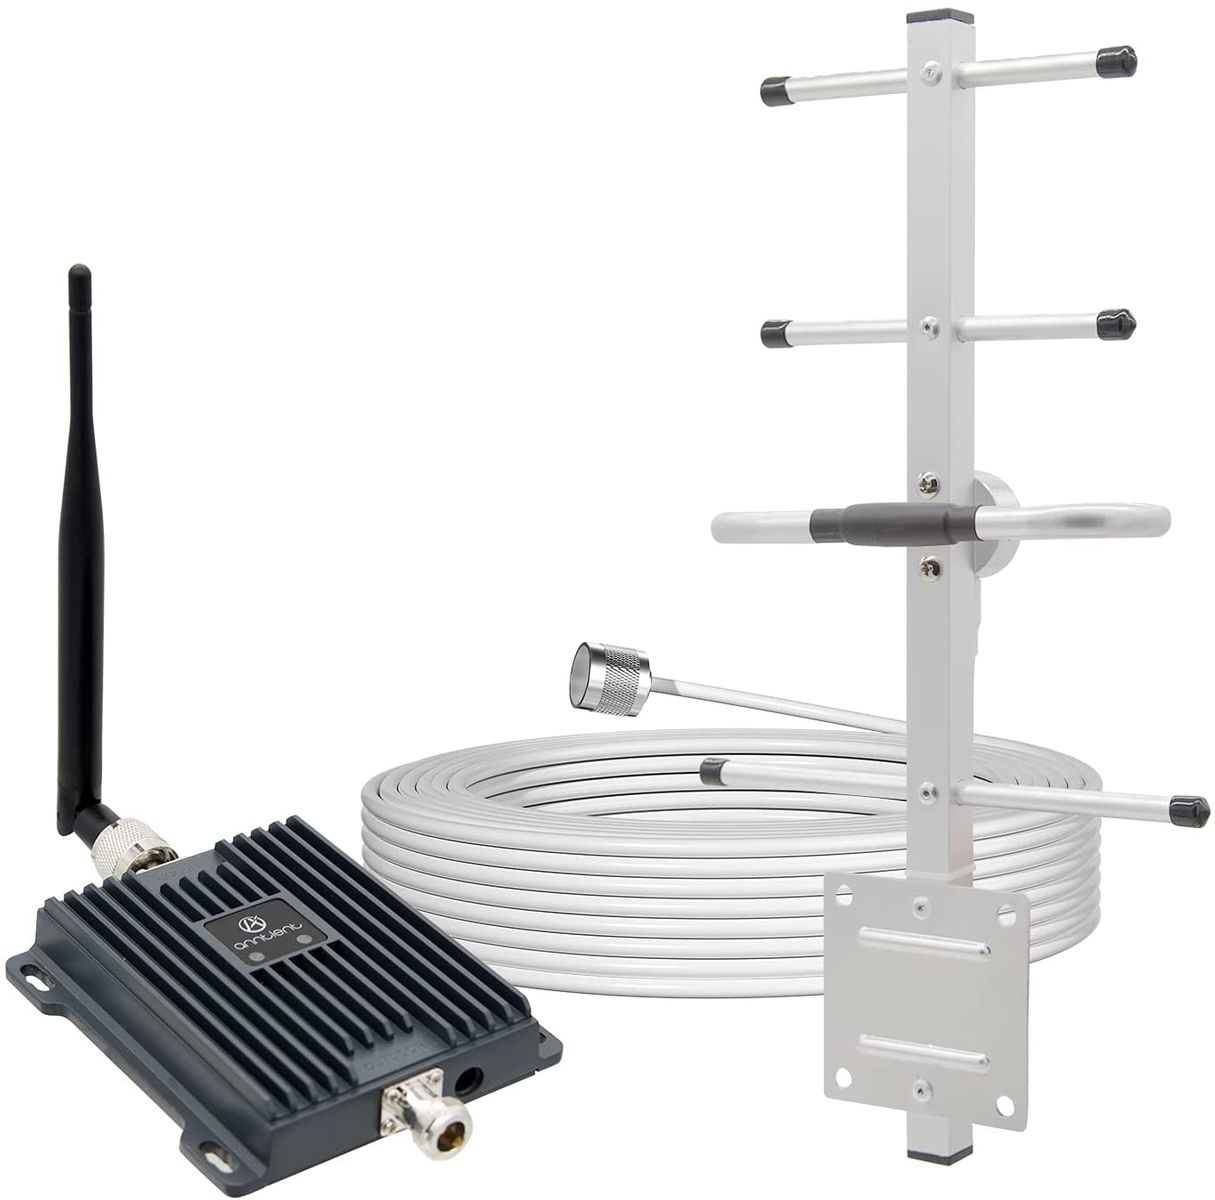 ANNTLENT cell phone signal booster 4G LTE cellular repeater 4G 800MHz band 20 GSM 900MHz band 8 signal booster internet booster for E-Plus O2 T-Mobile Vodafone suit for home/office use panel+yagi 800MHz